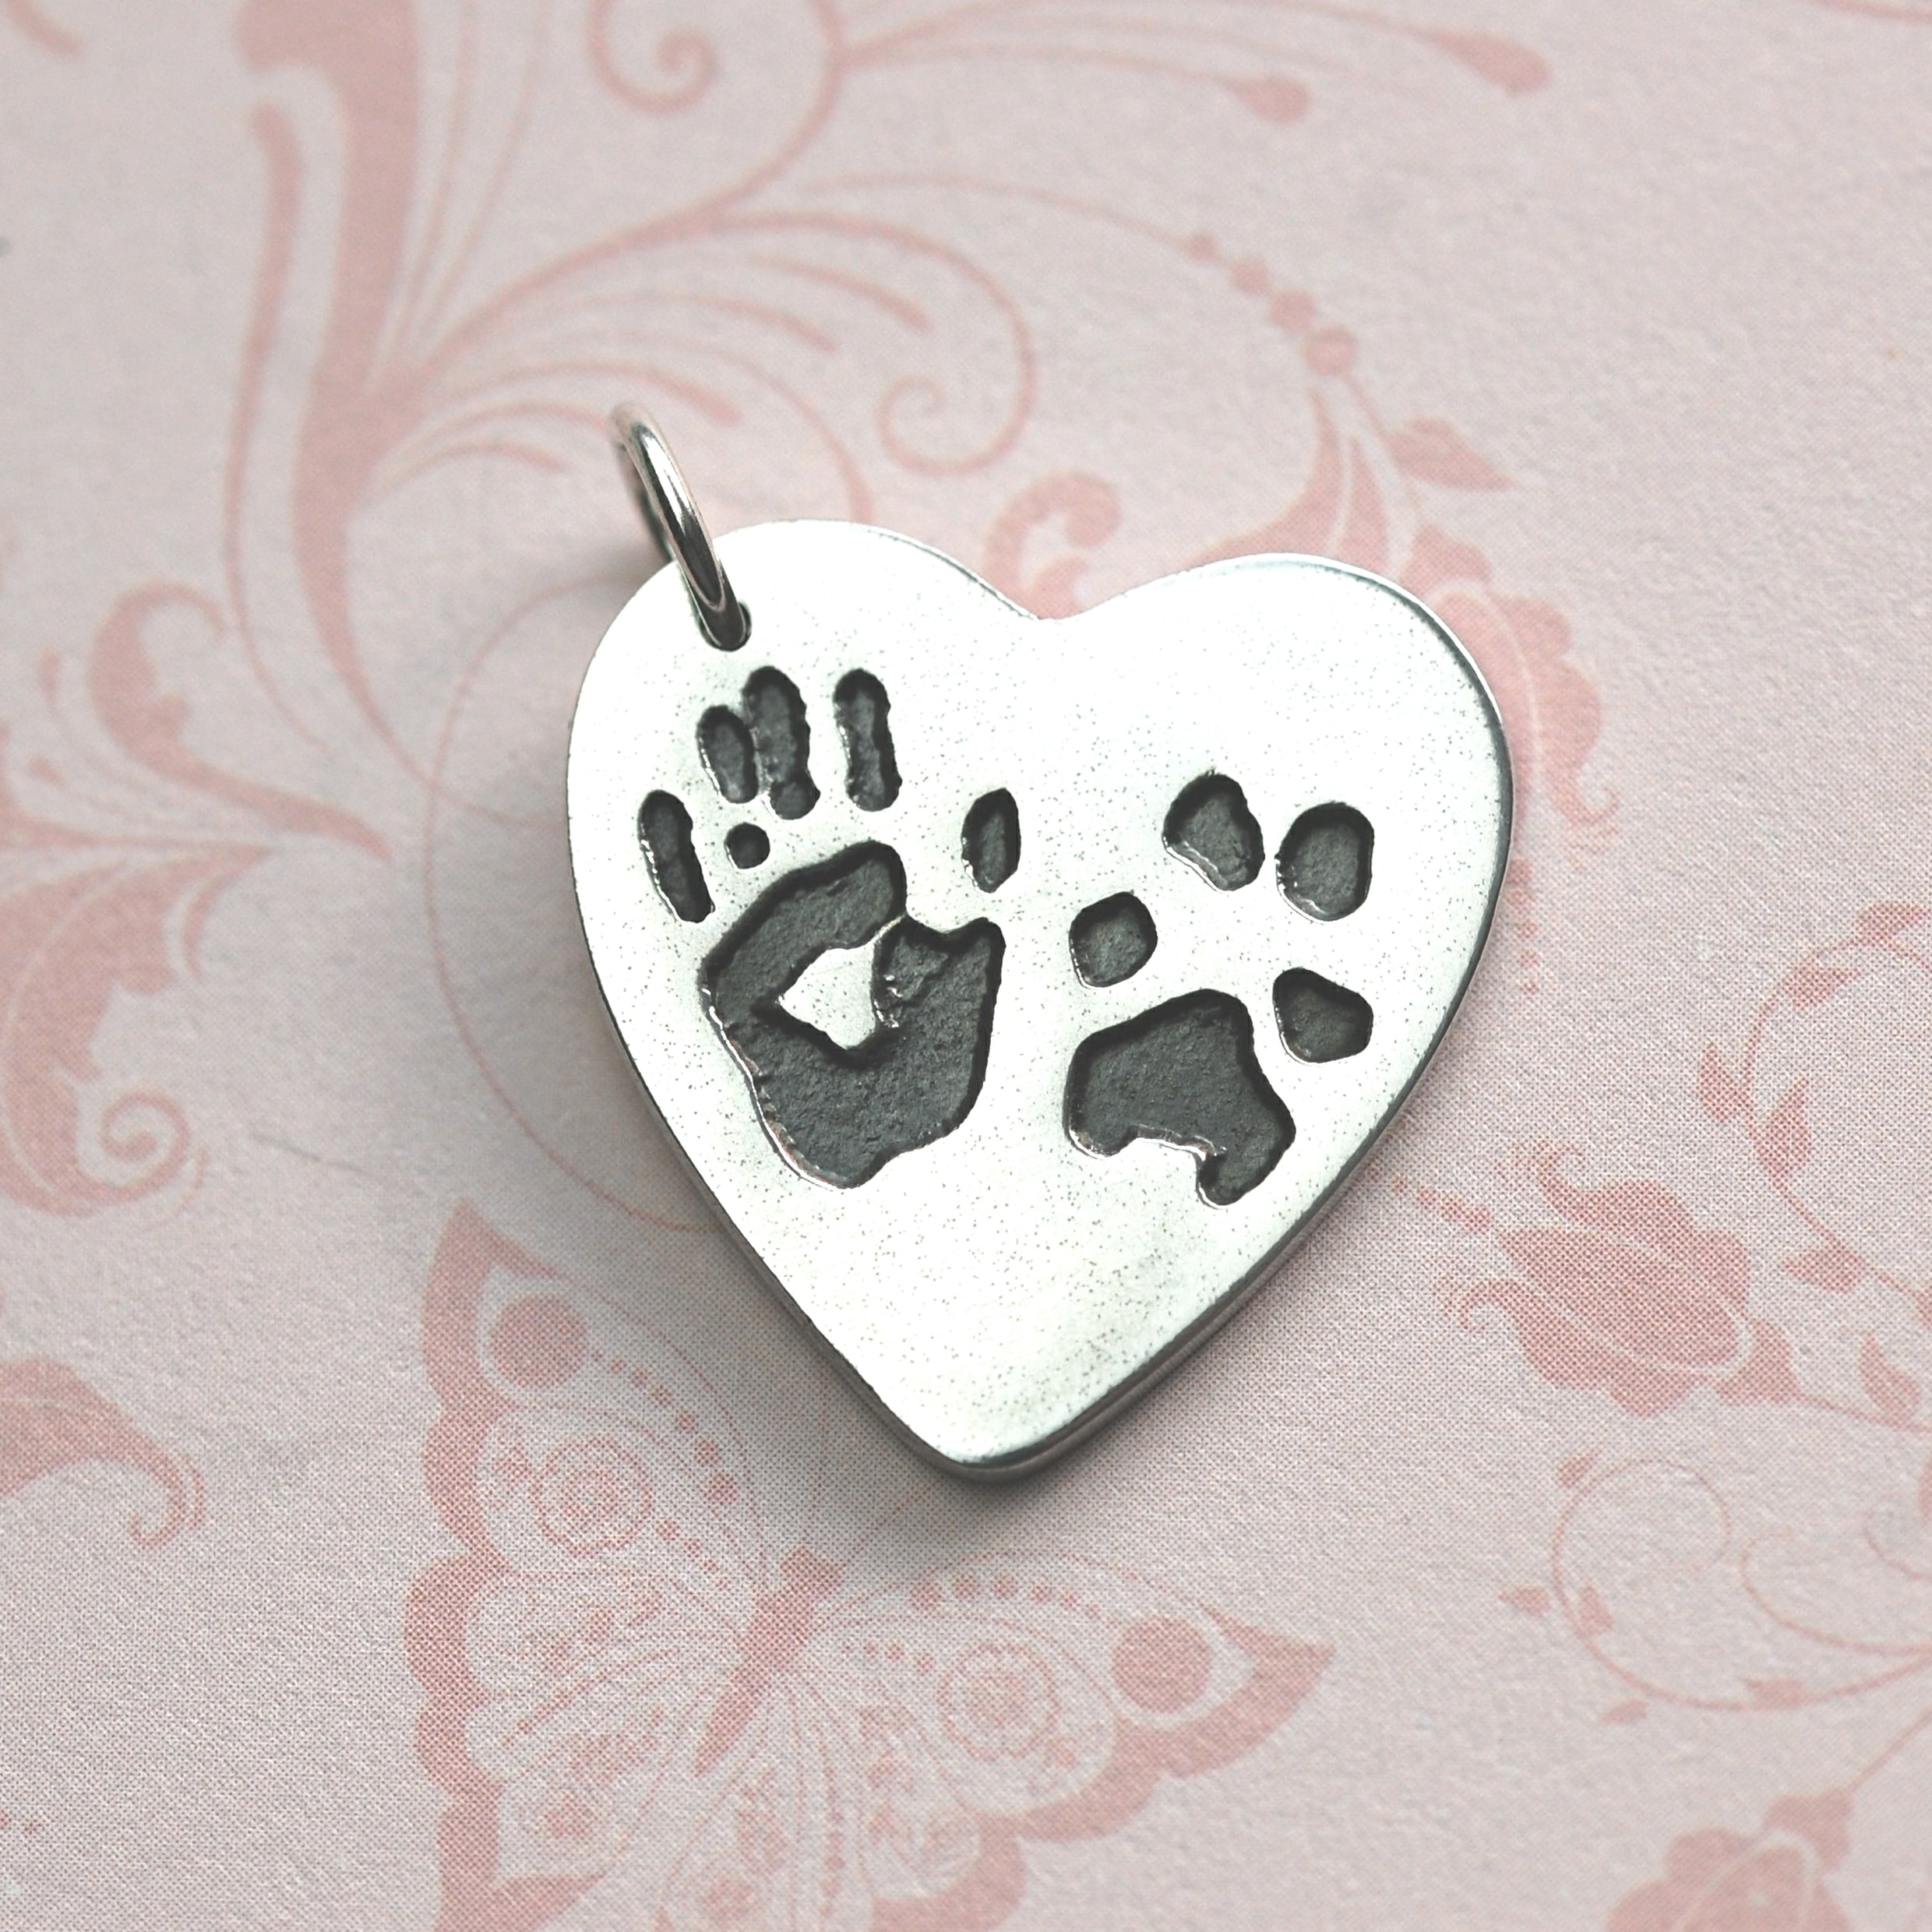 Large silver heart with unique hand and paw prints and names